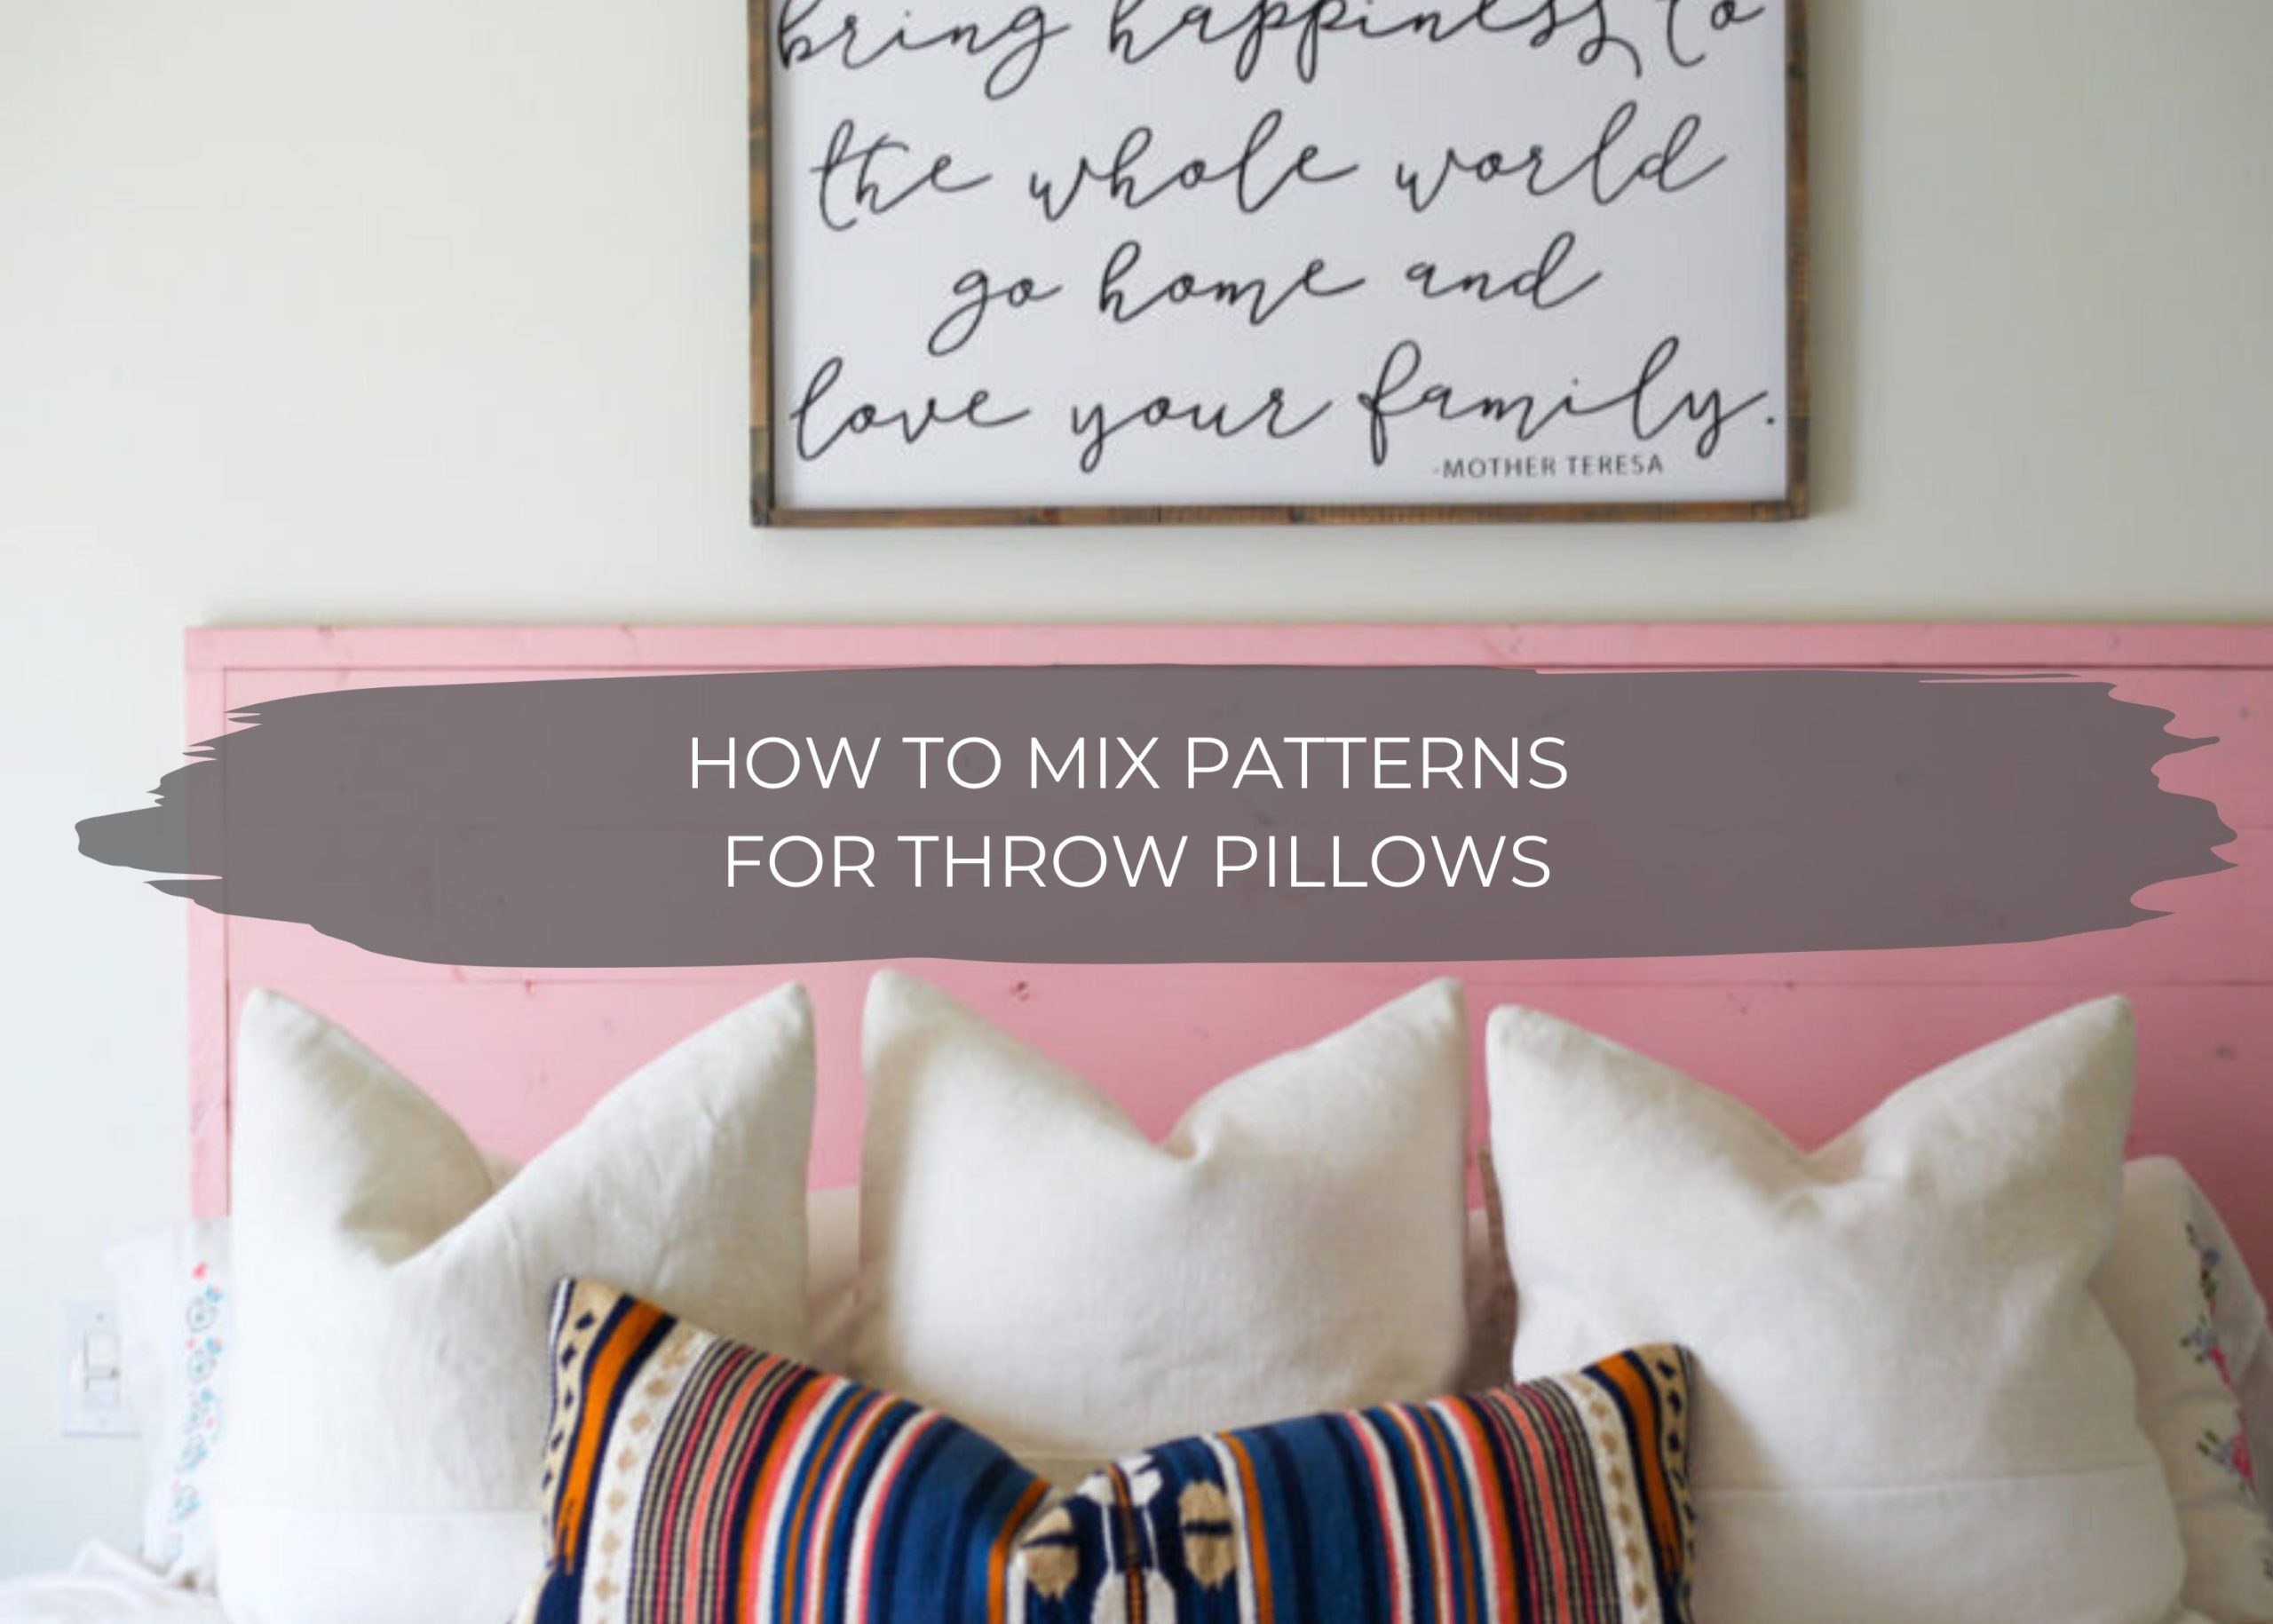 How To Mix Patterns For Throw Pillows 1